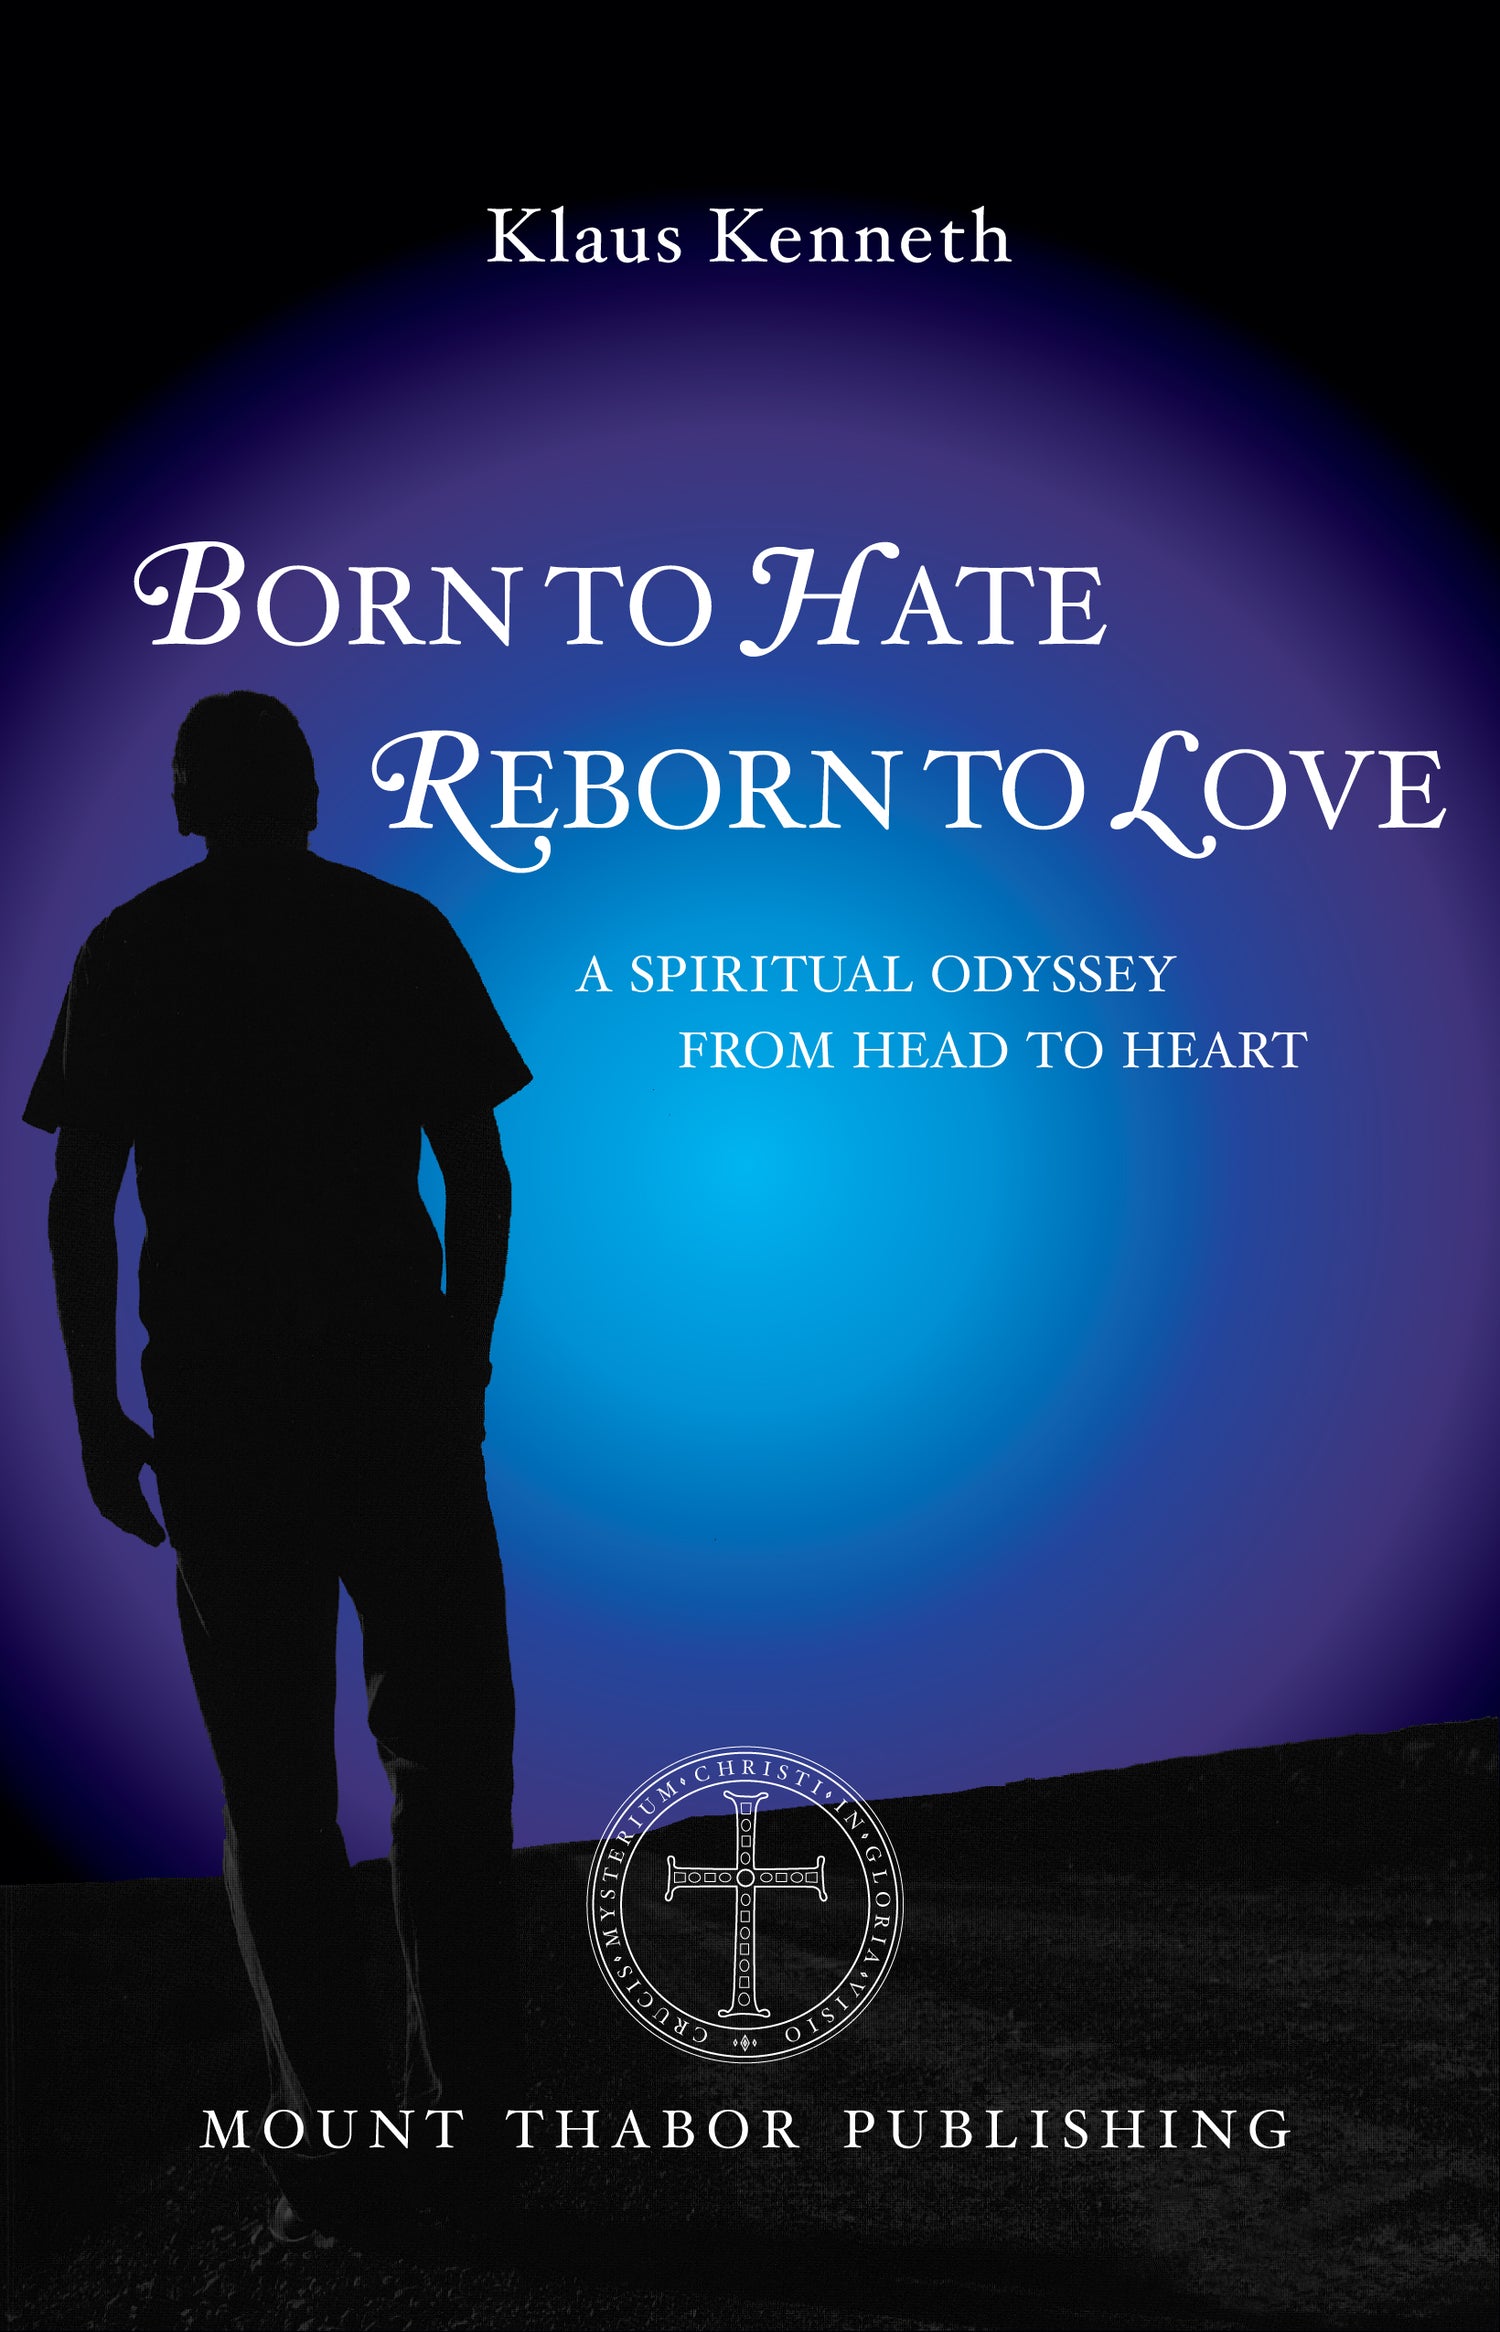 Front Cover of Born to Hate Reborn to Love: A Spiritual Odyssey from Head to Heart by Klaus Kenneth